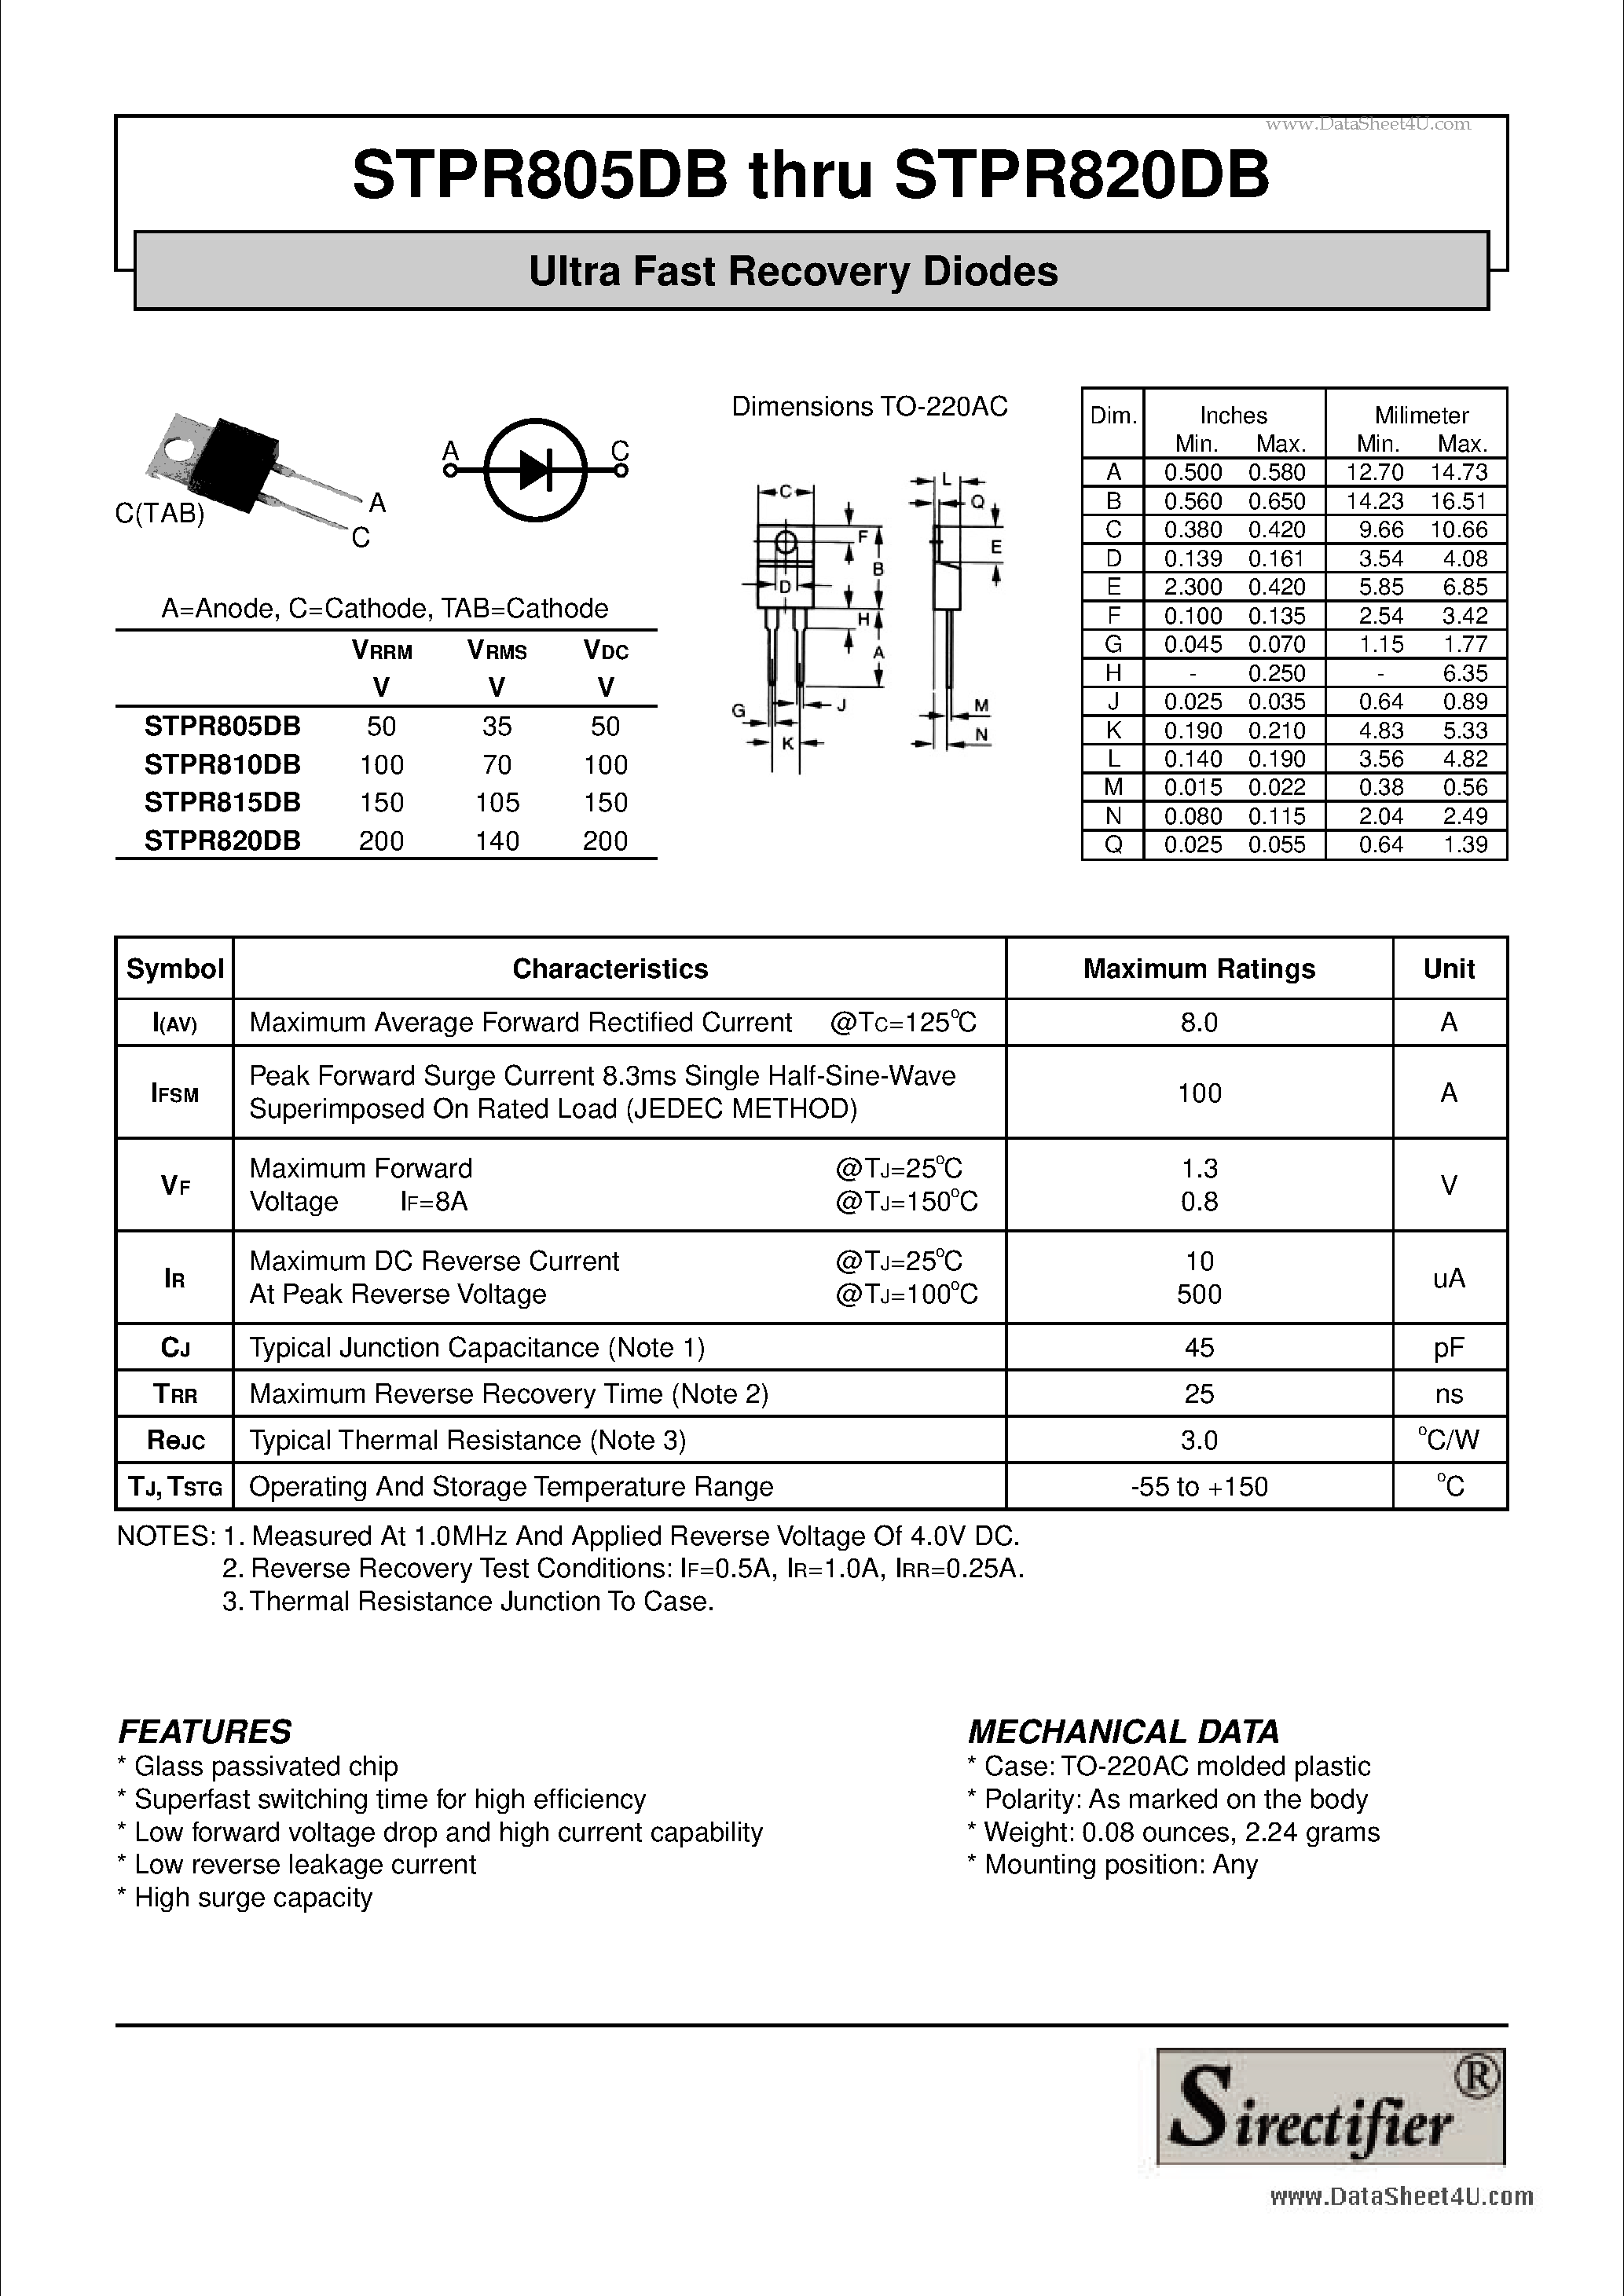 Datasheet STPR805DB - Ultra Fast Recovery Diodes page 1